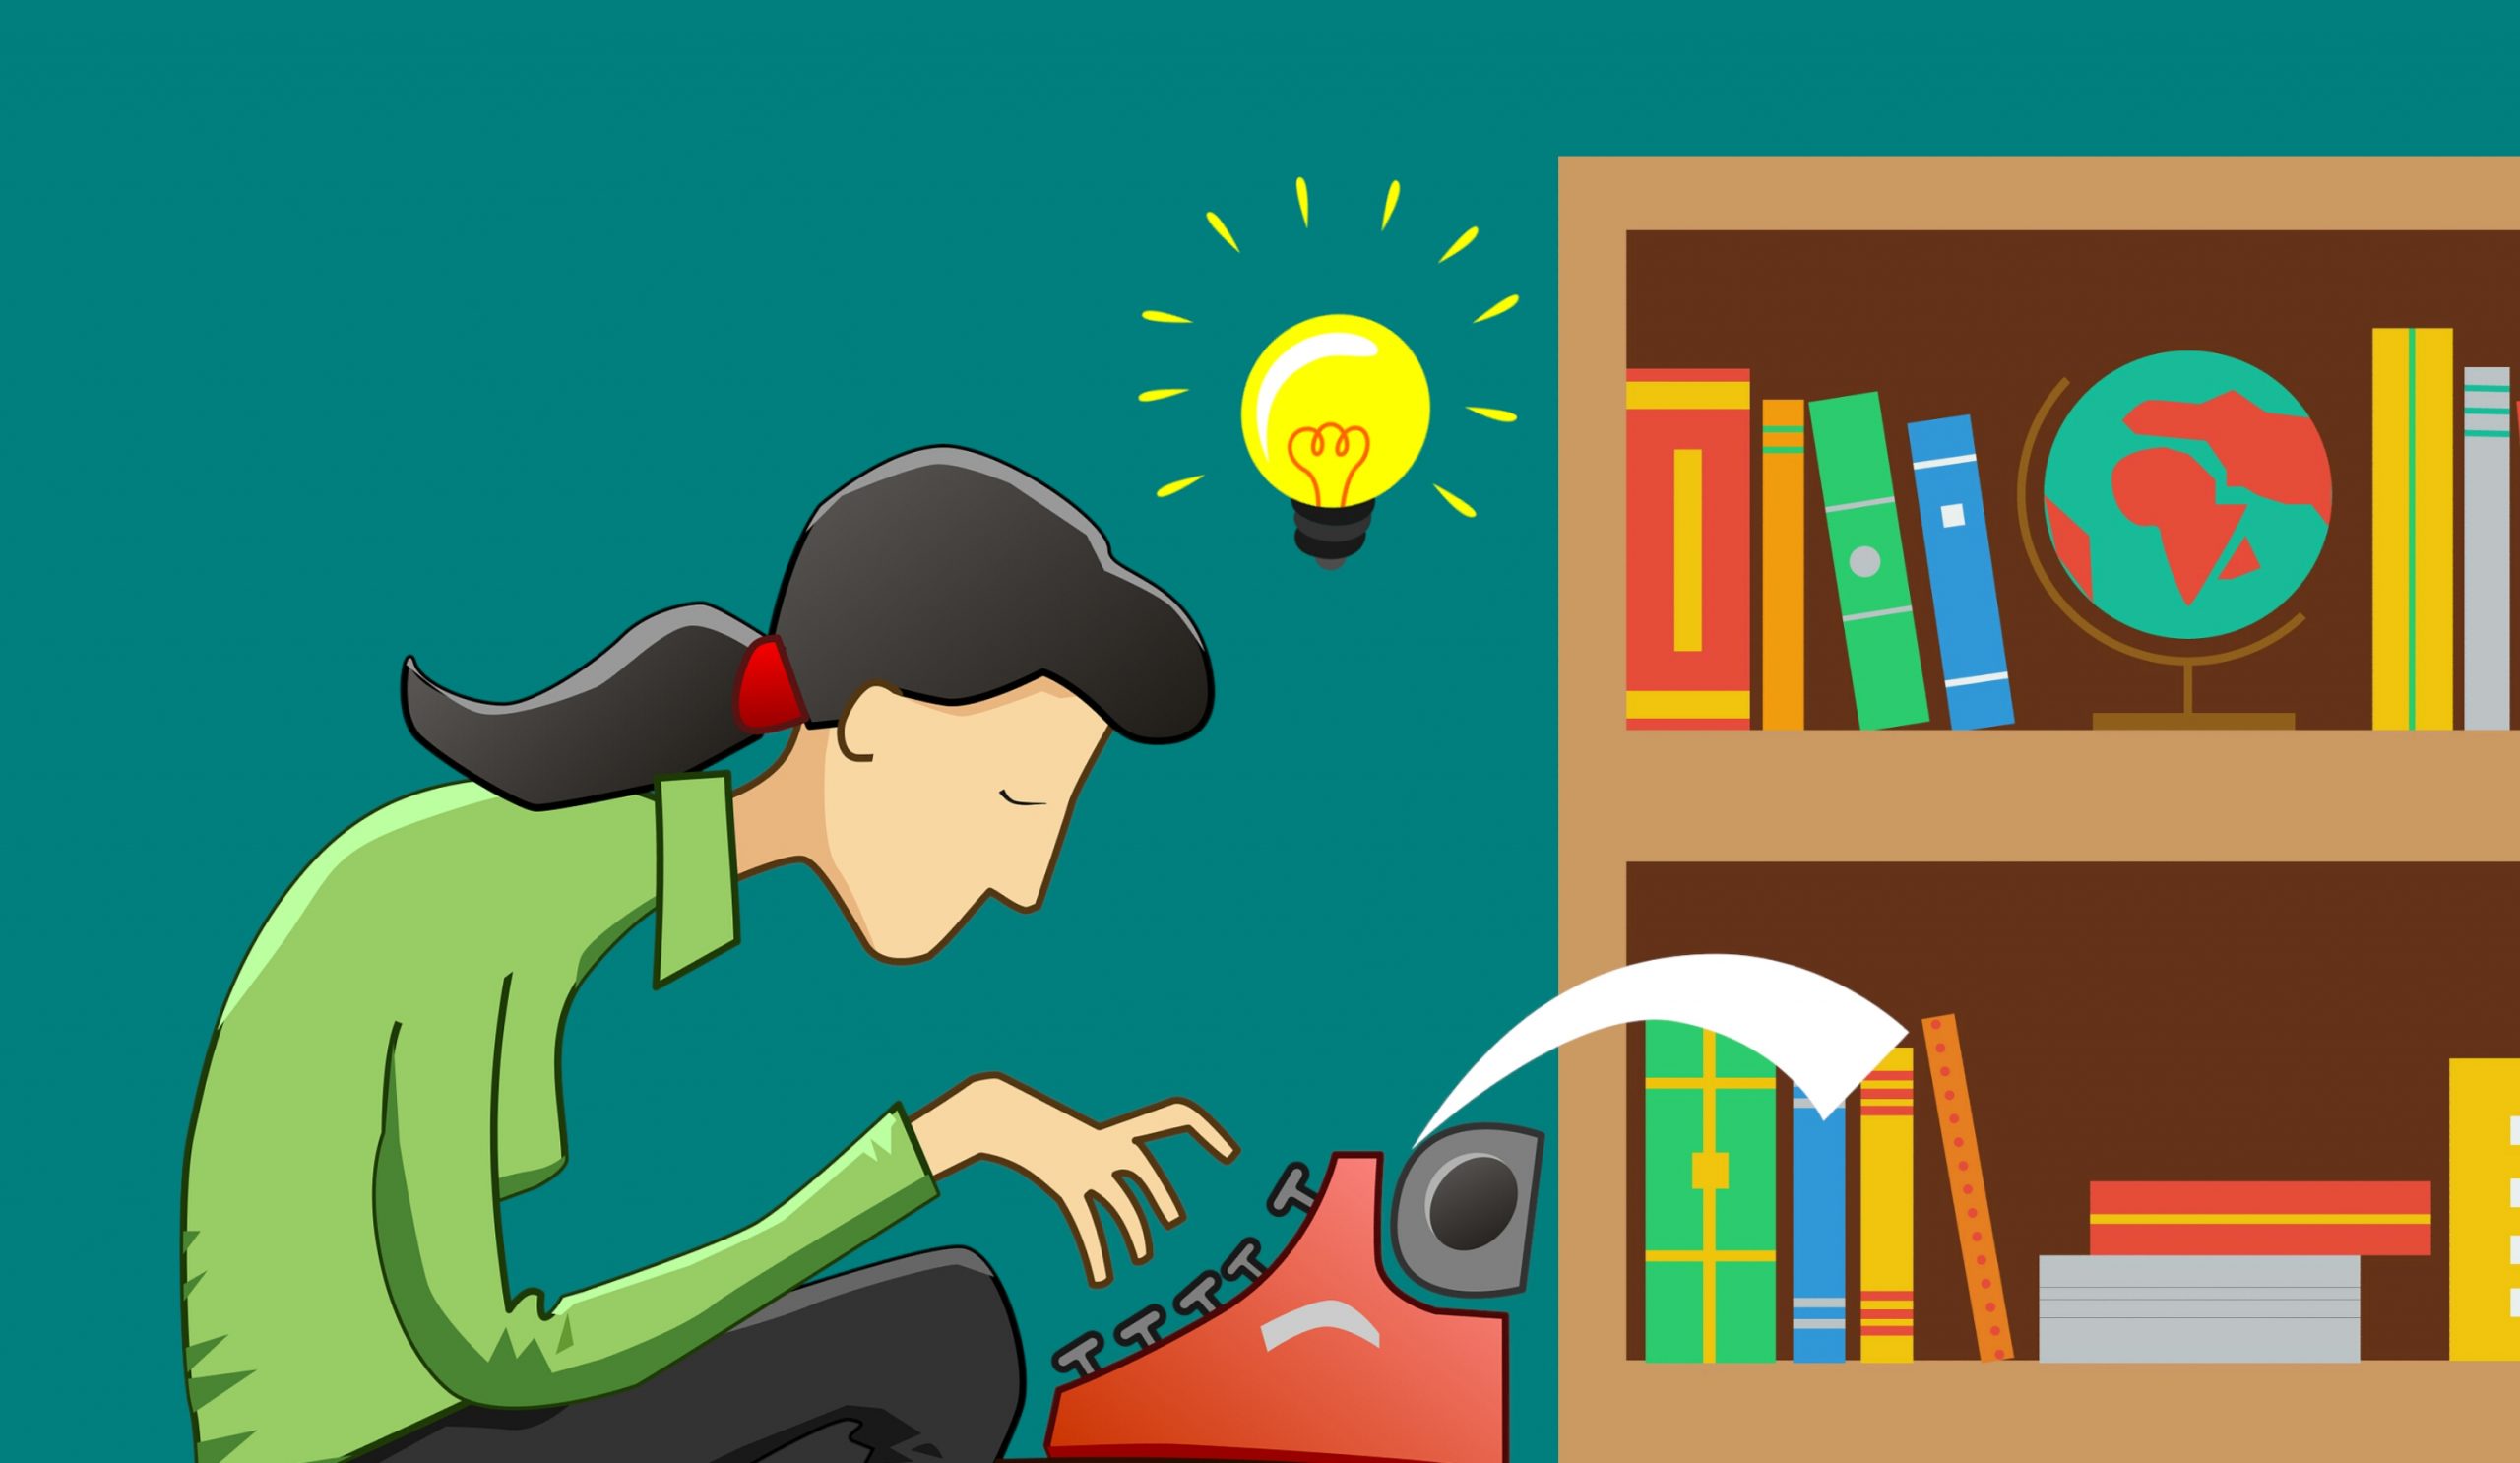 Writer with a long black ponytail wears a green collared shirt with a shining lightbulb above their head symbolizing having an idea. The writer is typing on a red typewriter in a teal coloured room with a brown bookcase filled with books and a globe.